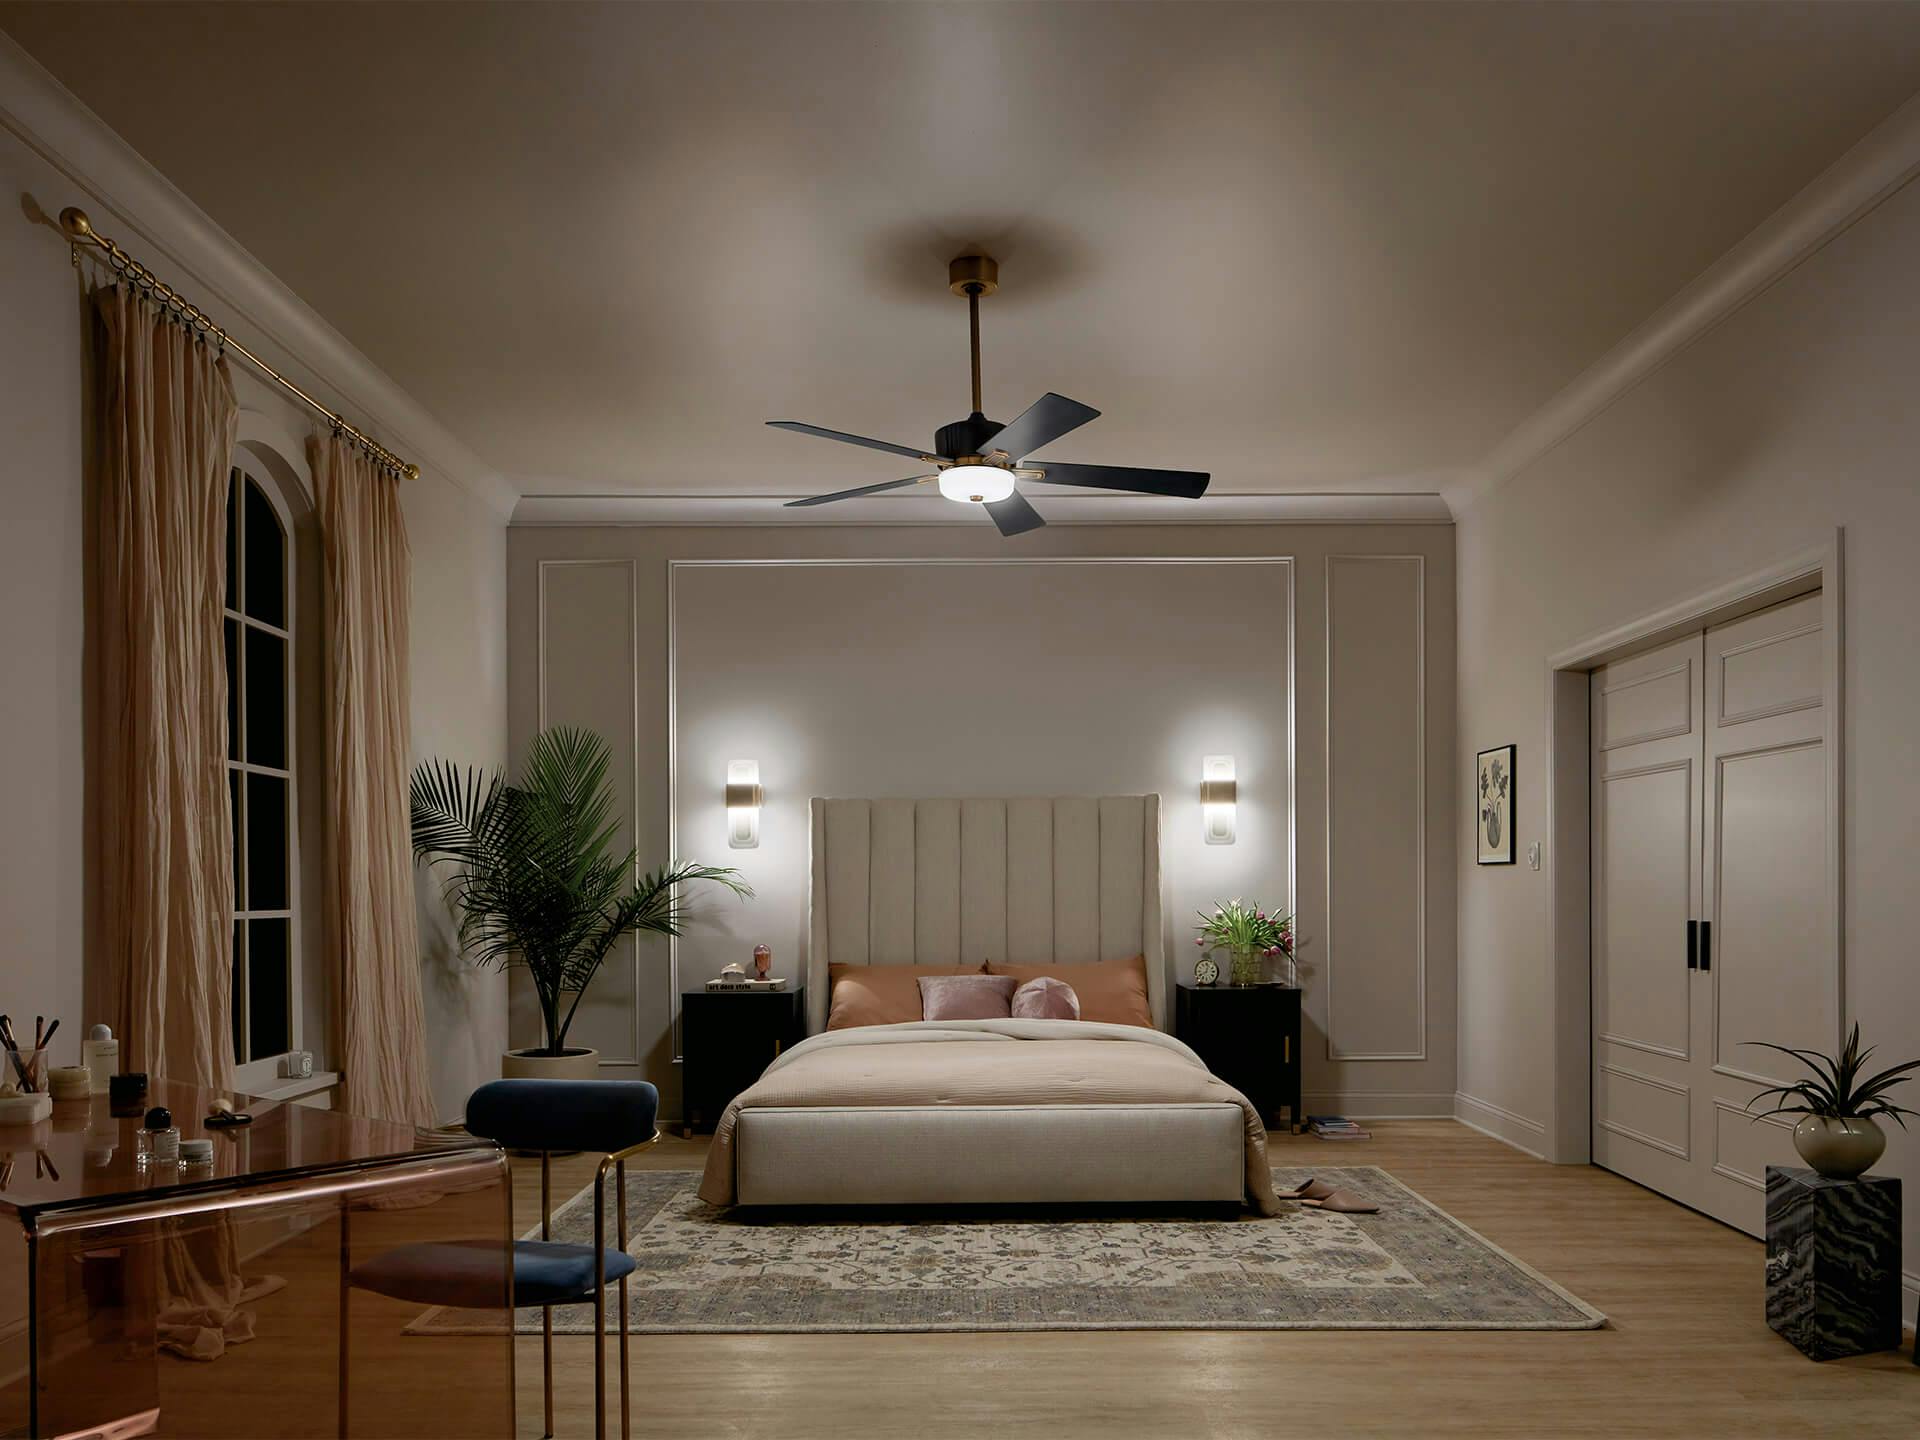 Bedroom at night with an icon ceiling fan in the center with sconces on either side of the bed frame.